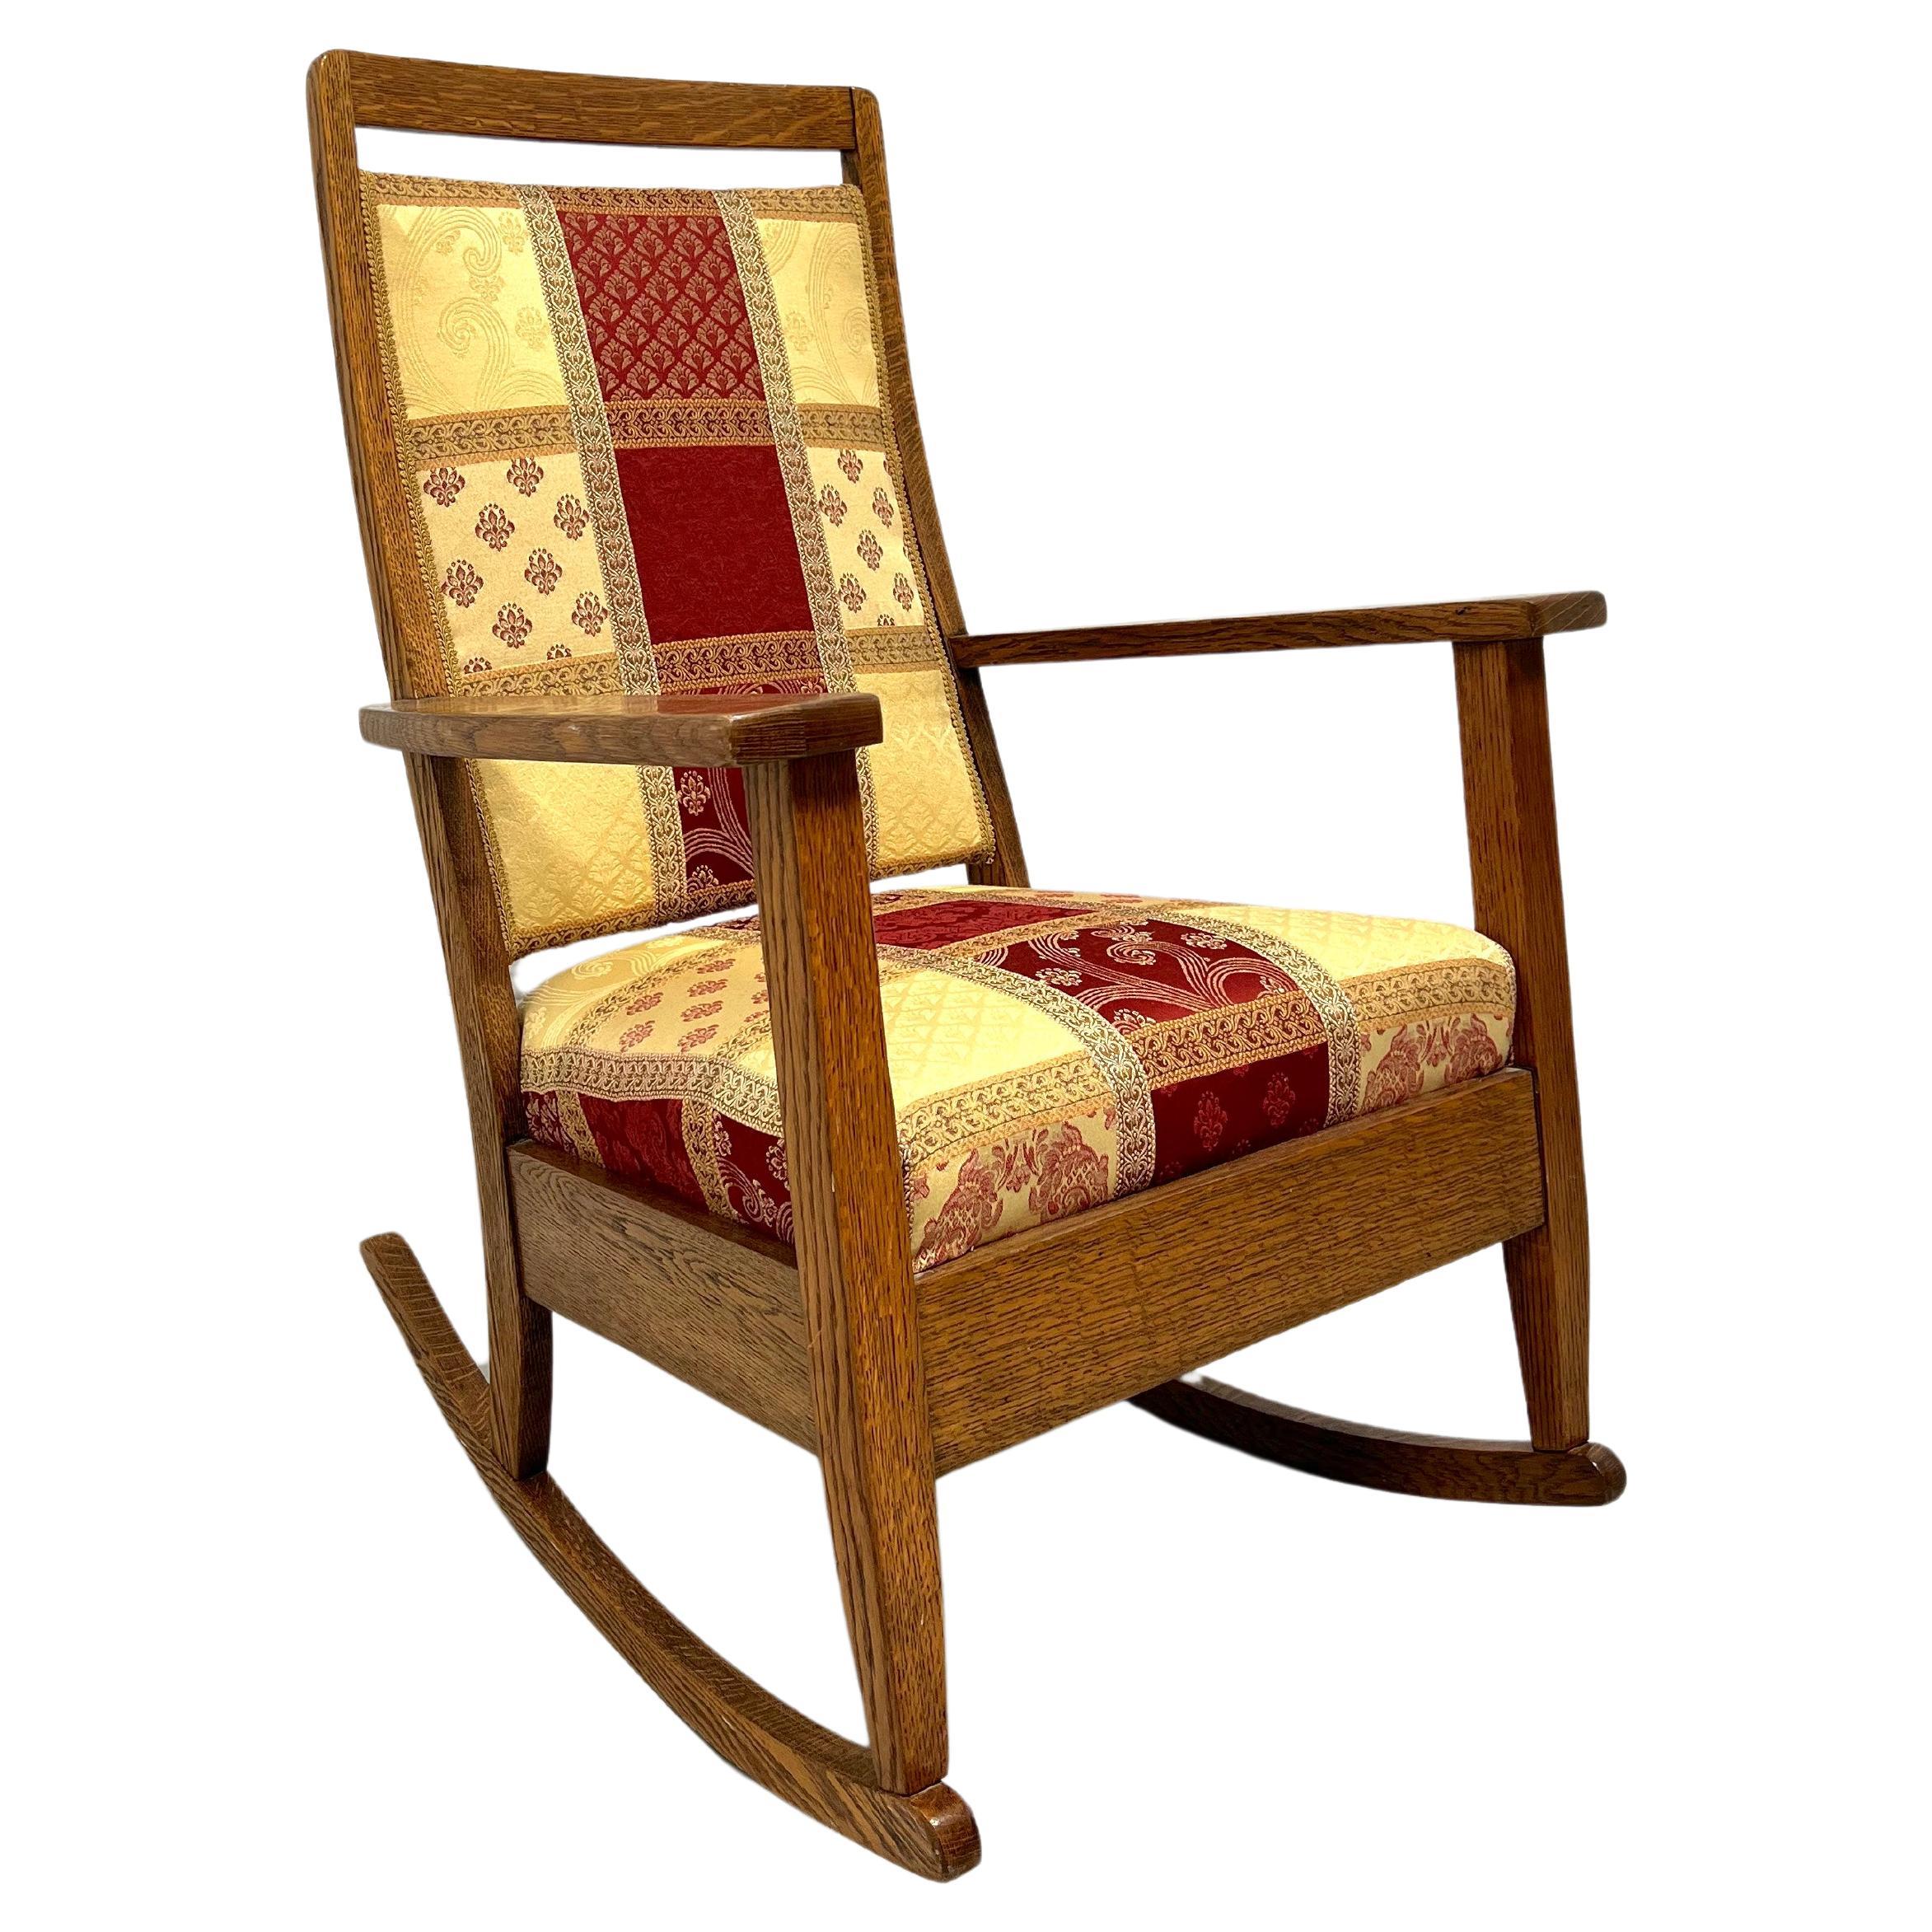 Early 20th Century Arts & Crafts Period Quartersawn Tiger Oak Rocking Chair For Sale